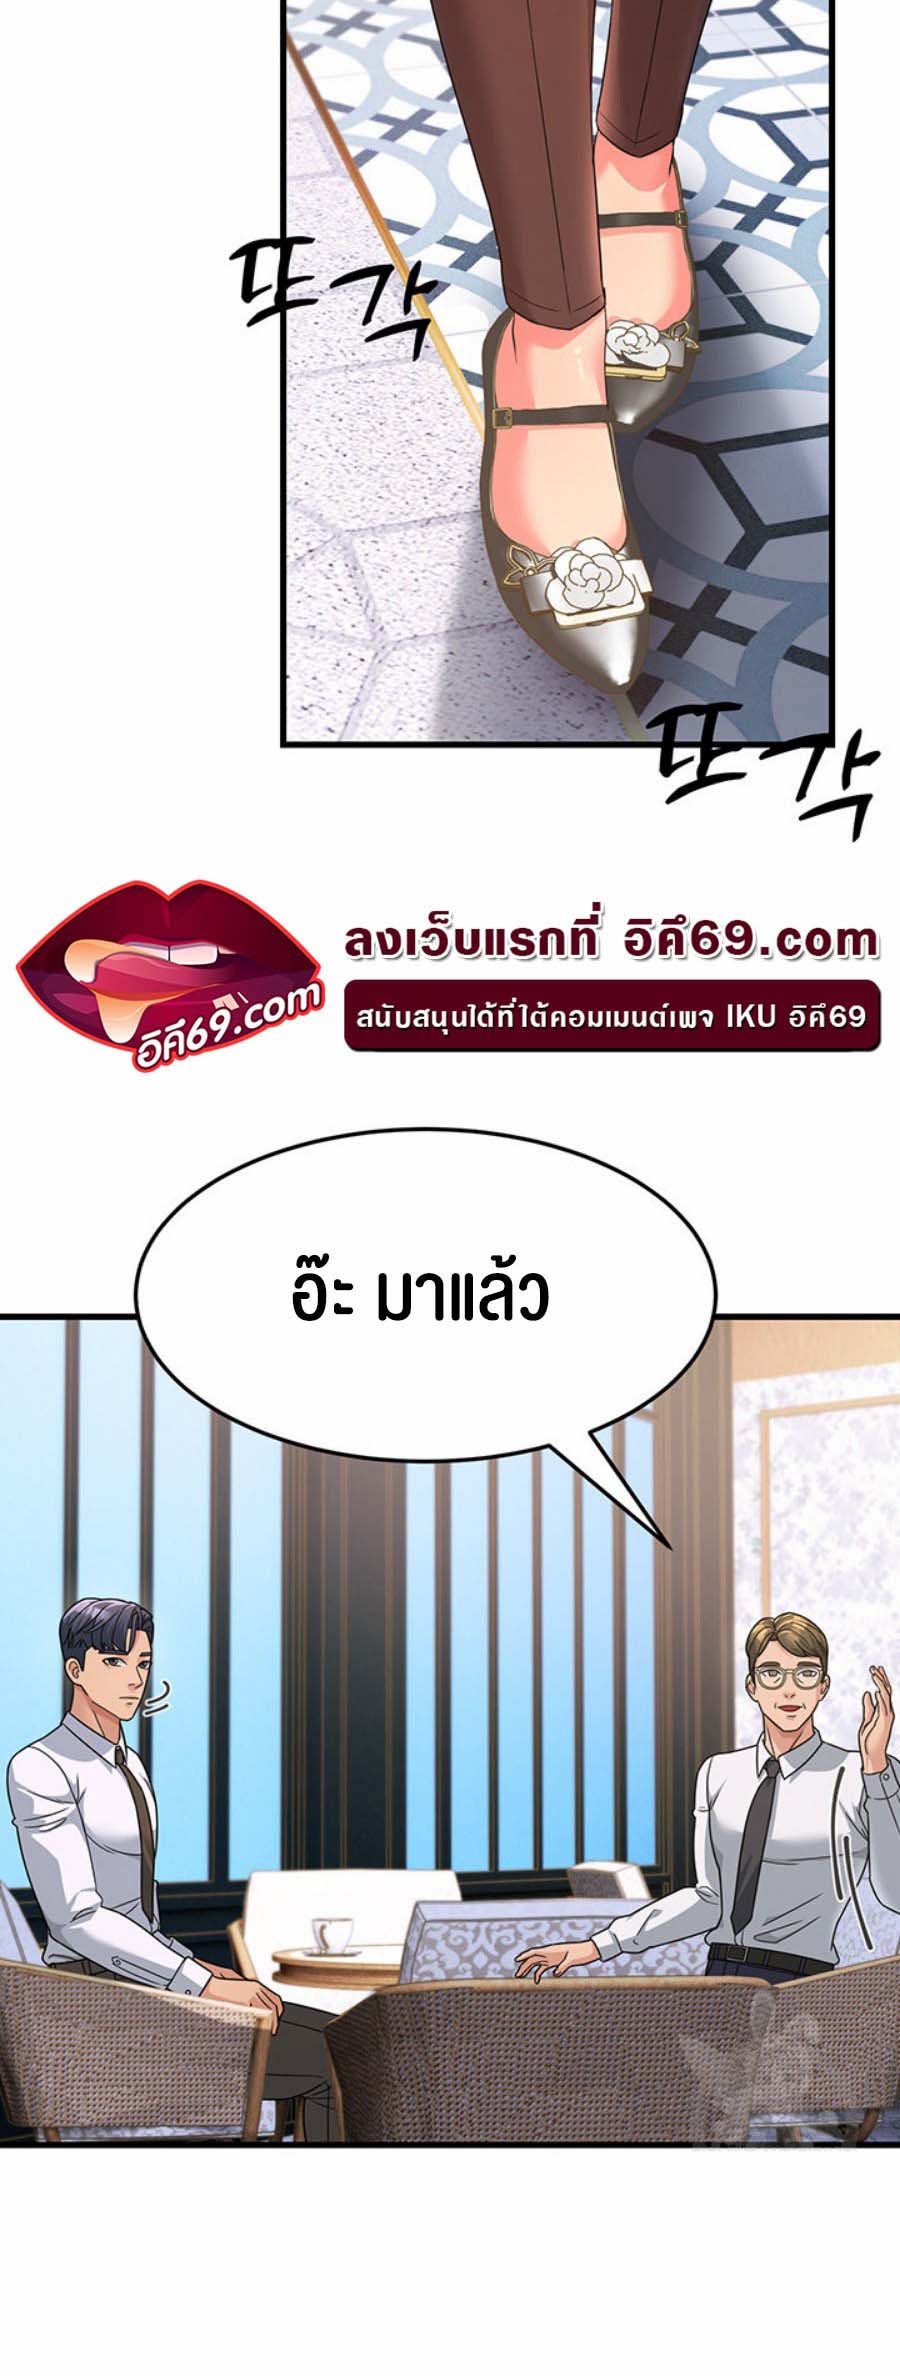 à¸­à¹ˆà¸²à¸™à¹‚à¸”à¸ˆà¸´à¸™ à¹€à¸£à¸·à¹ˆà¸­à¸‡ Mother in Law Bends To My Will 8 35